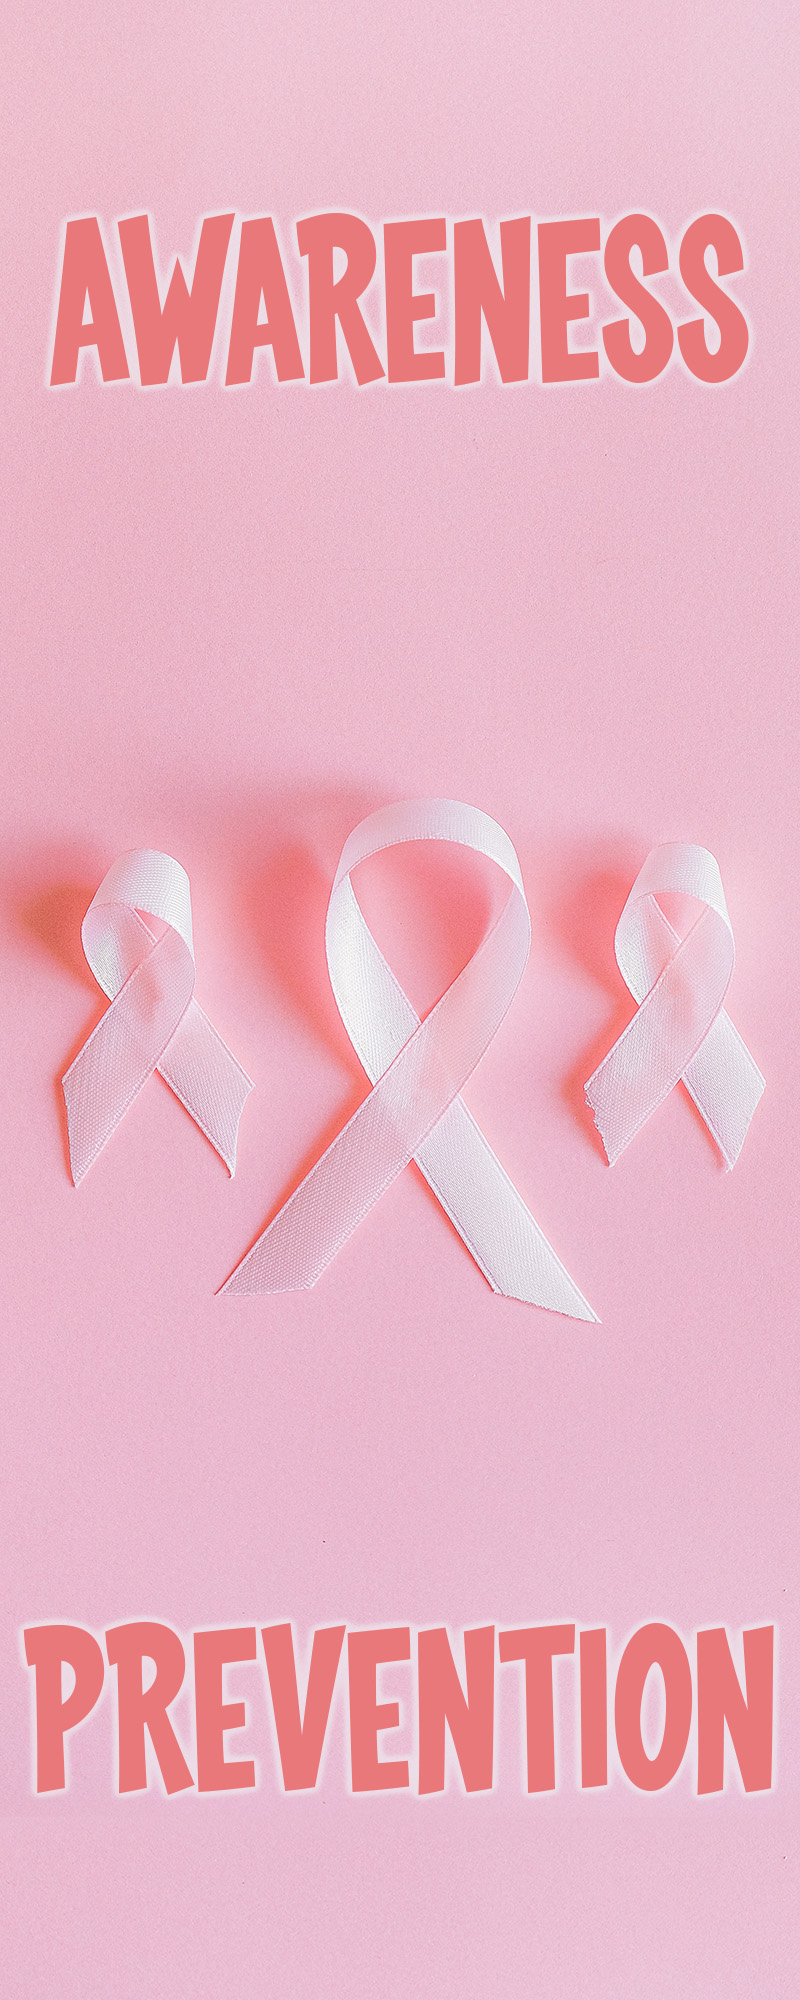 Breast Cancer Prevention Is Better!